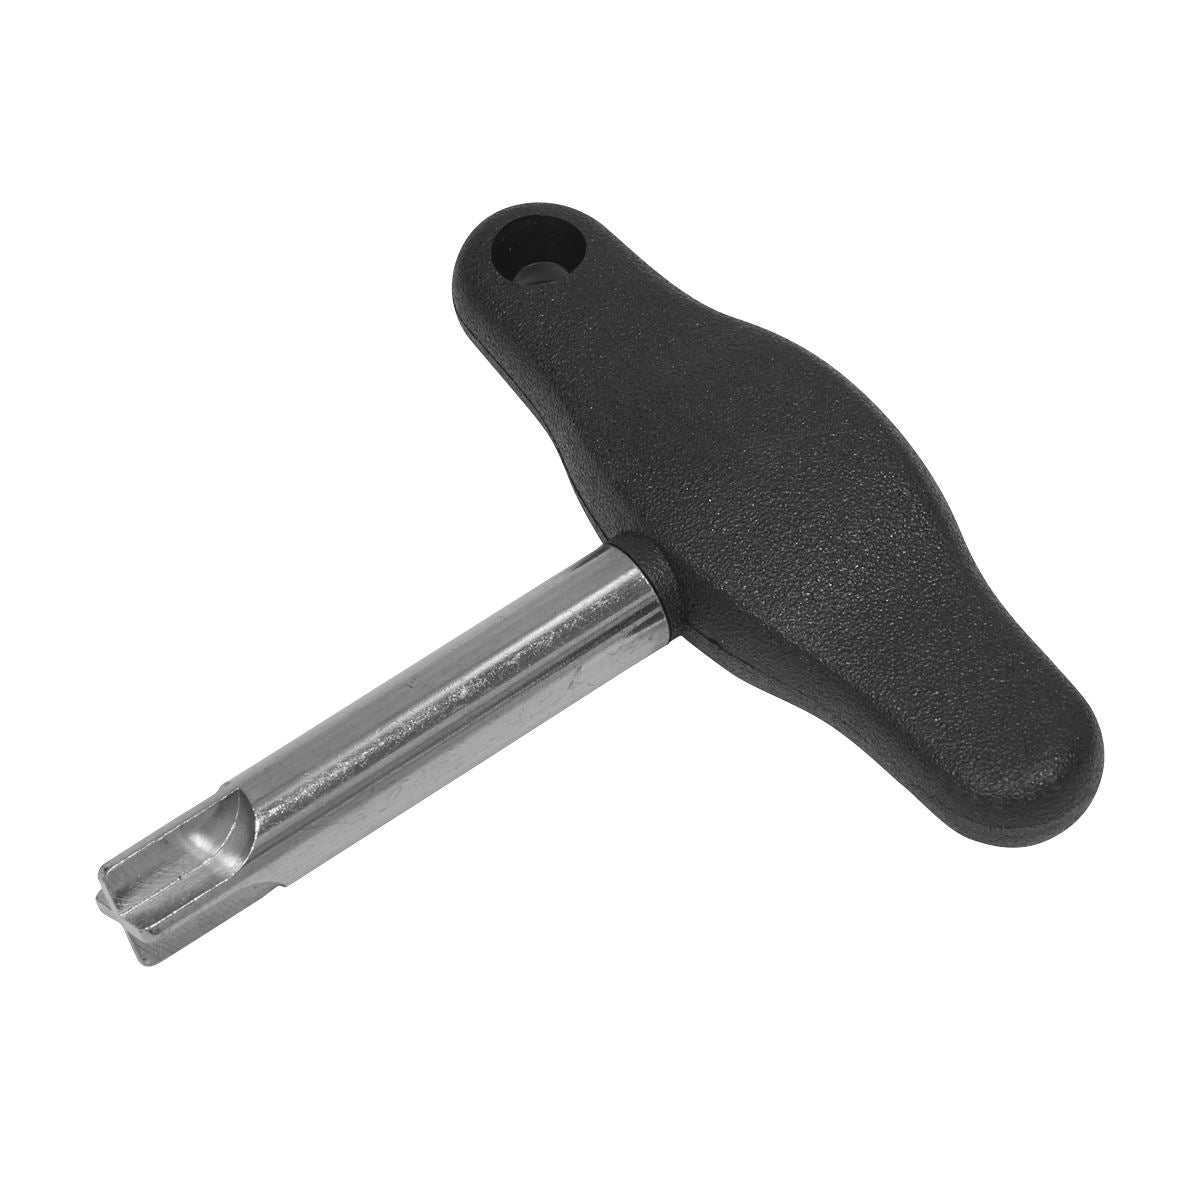 Sealey T-Handle Vehicle Service Screwdriver 1.3mm